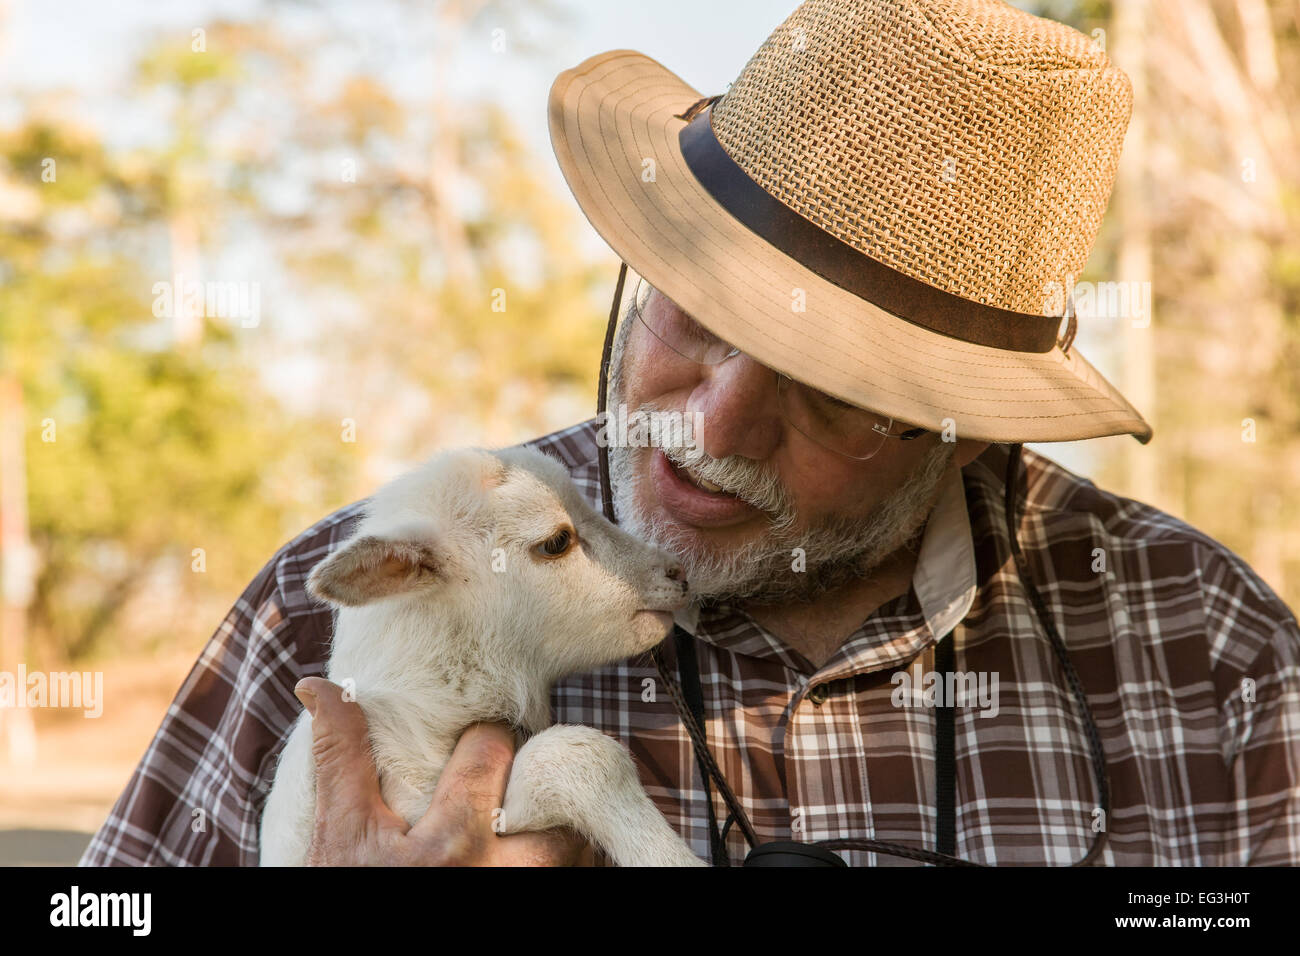 Man holding and talking softly to a lamb at a farm in Palo Verde National Park, Costa Rica Stock Photo